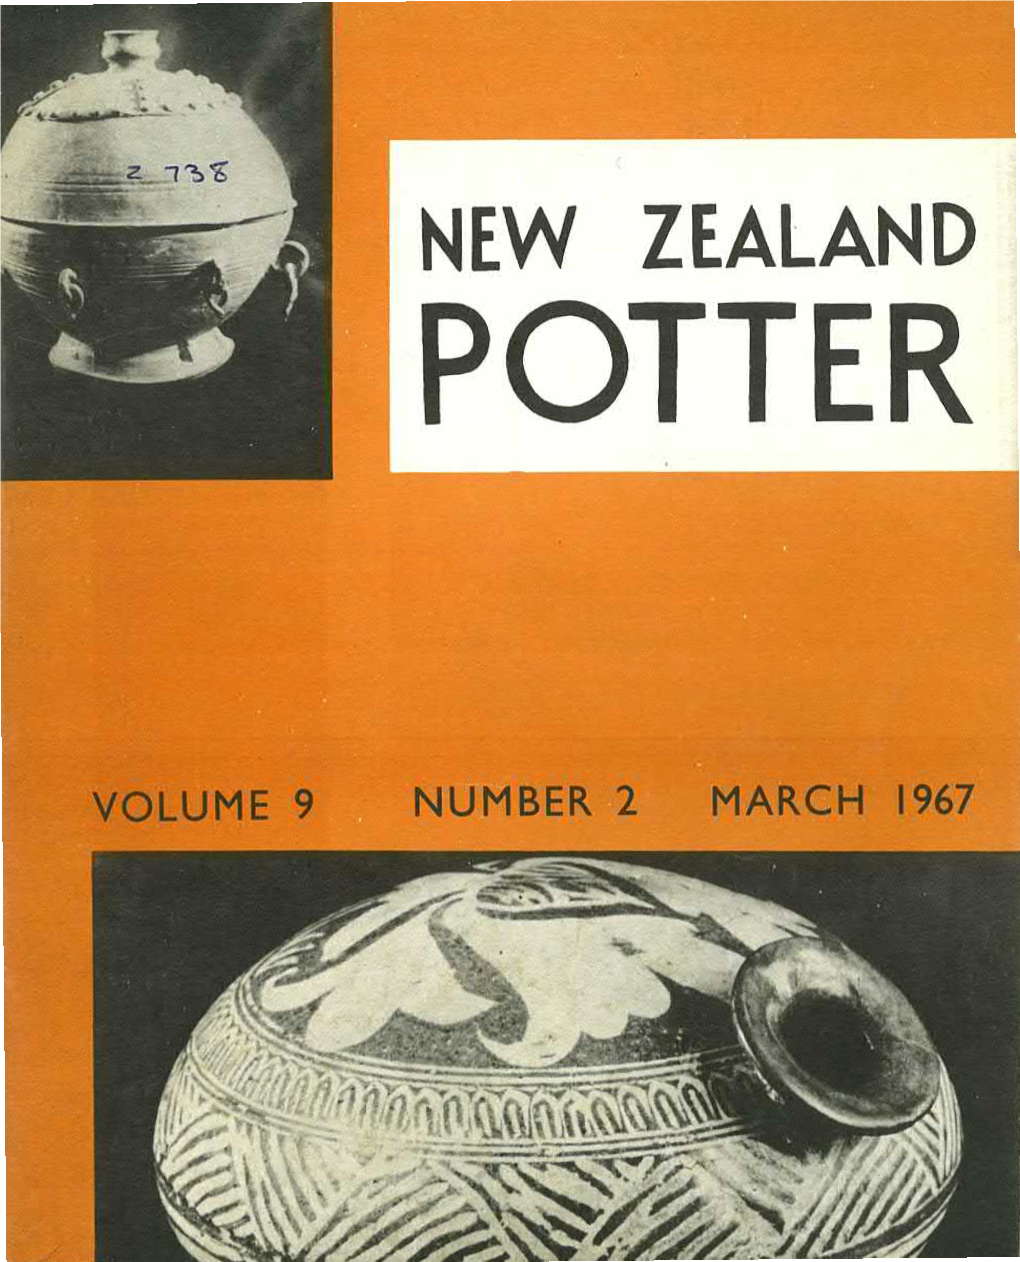 New Zealand Potter Volume 9 Number 2 March 1967